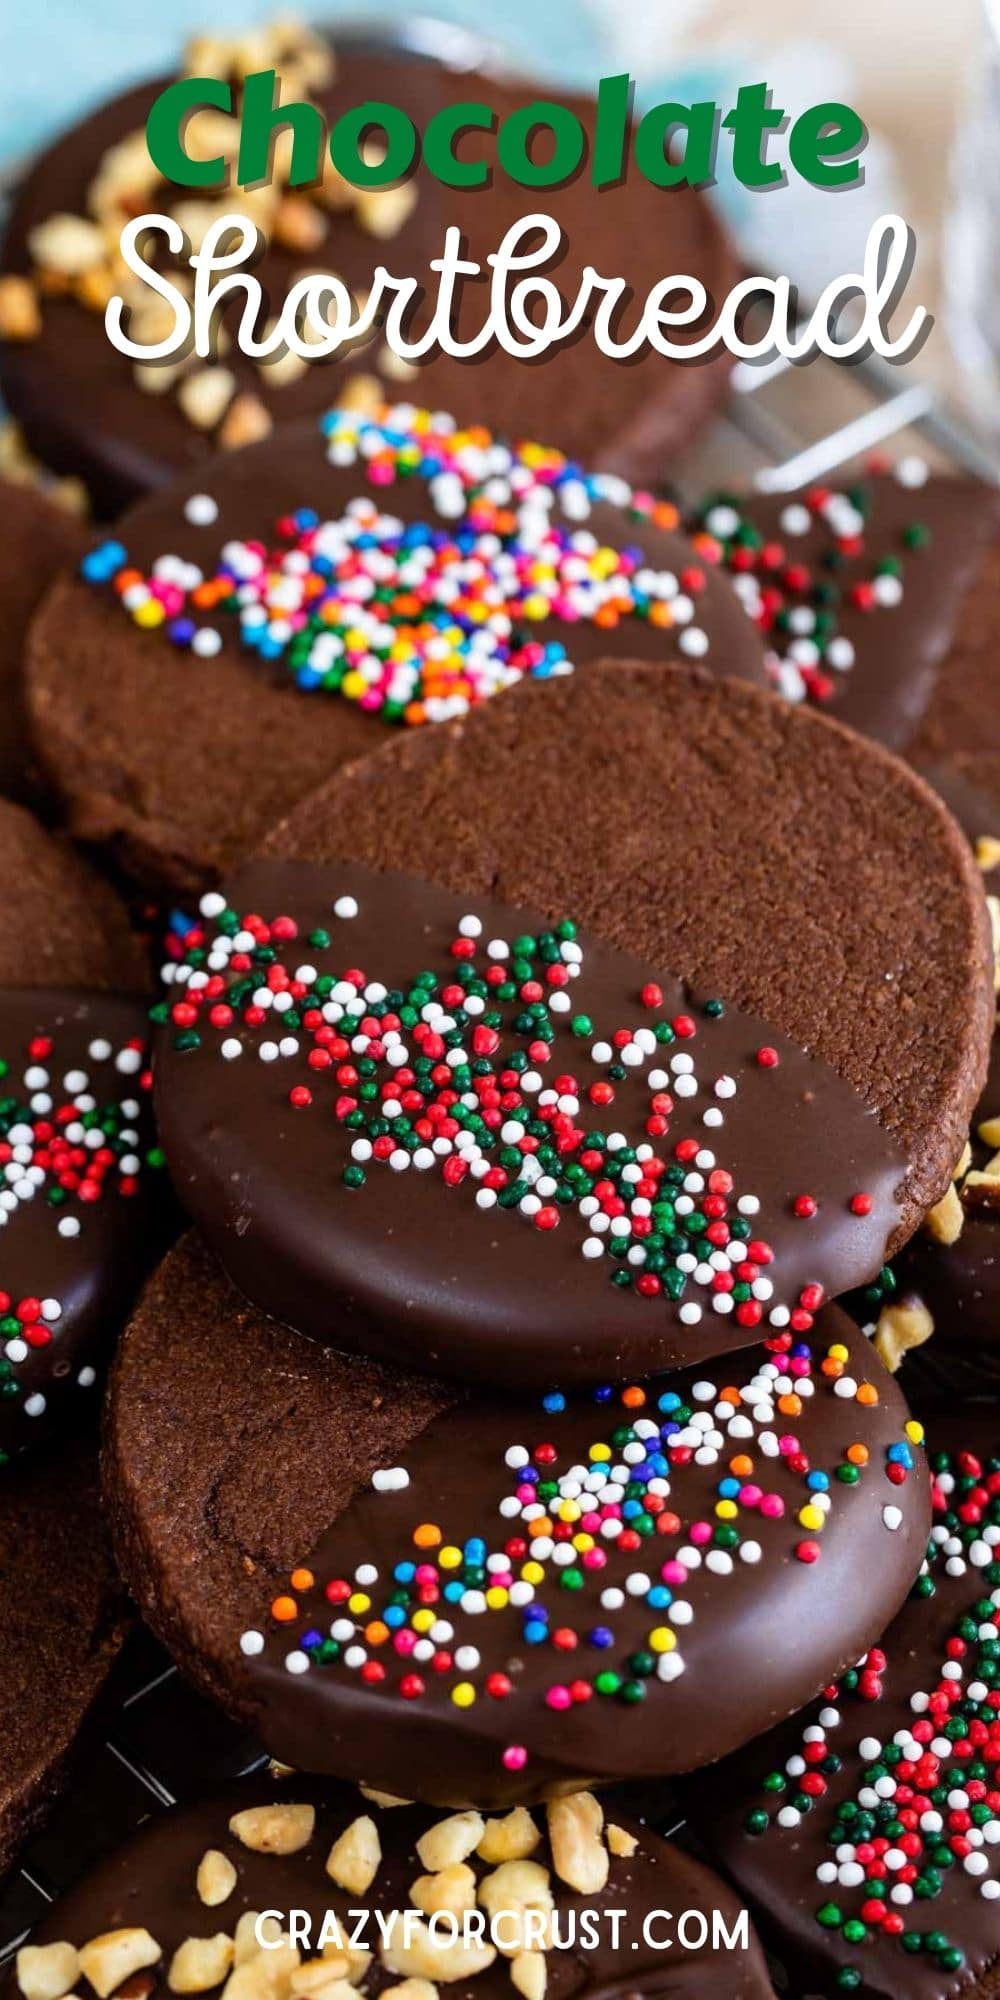 Chocolate shortbread cookies with sprinkles and recipe title on top of image